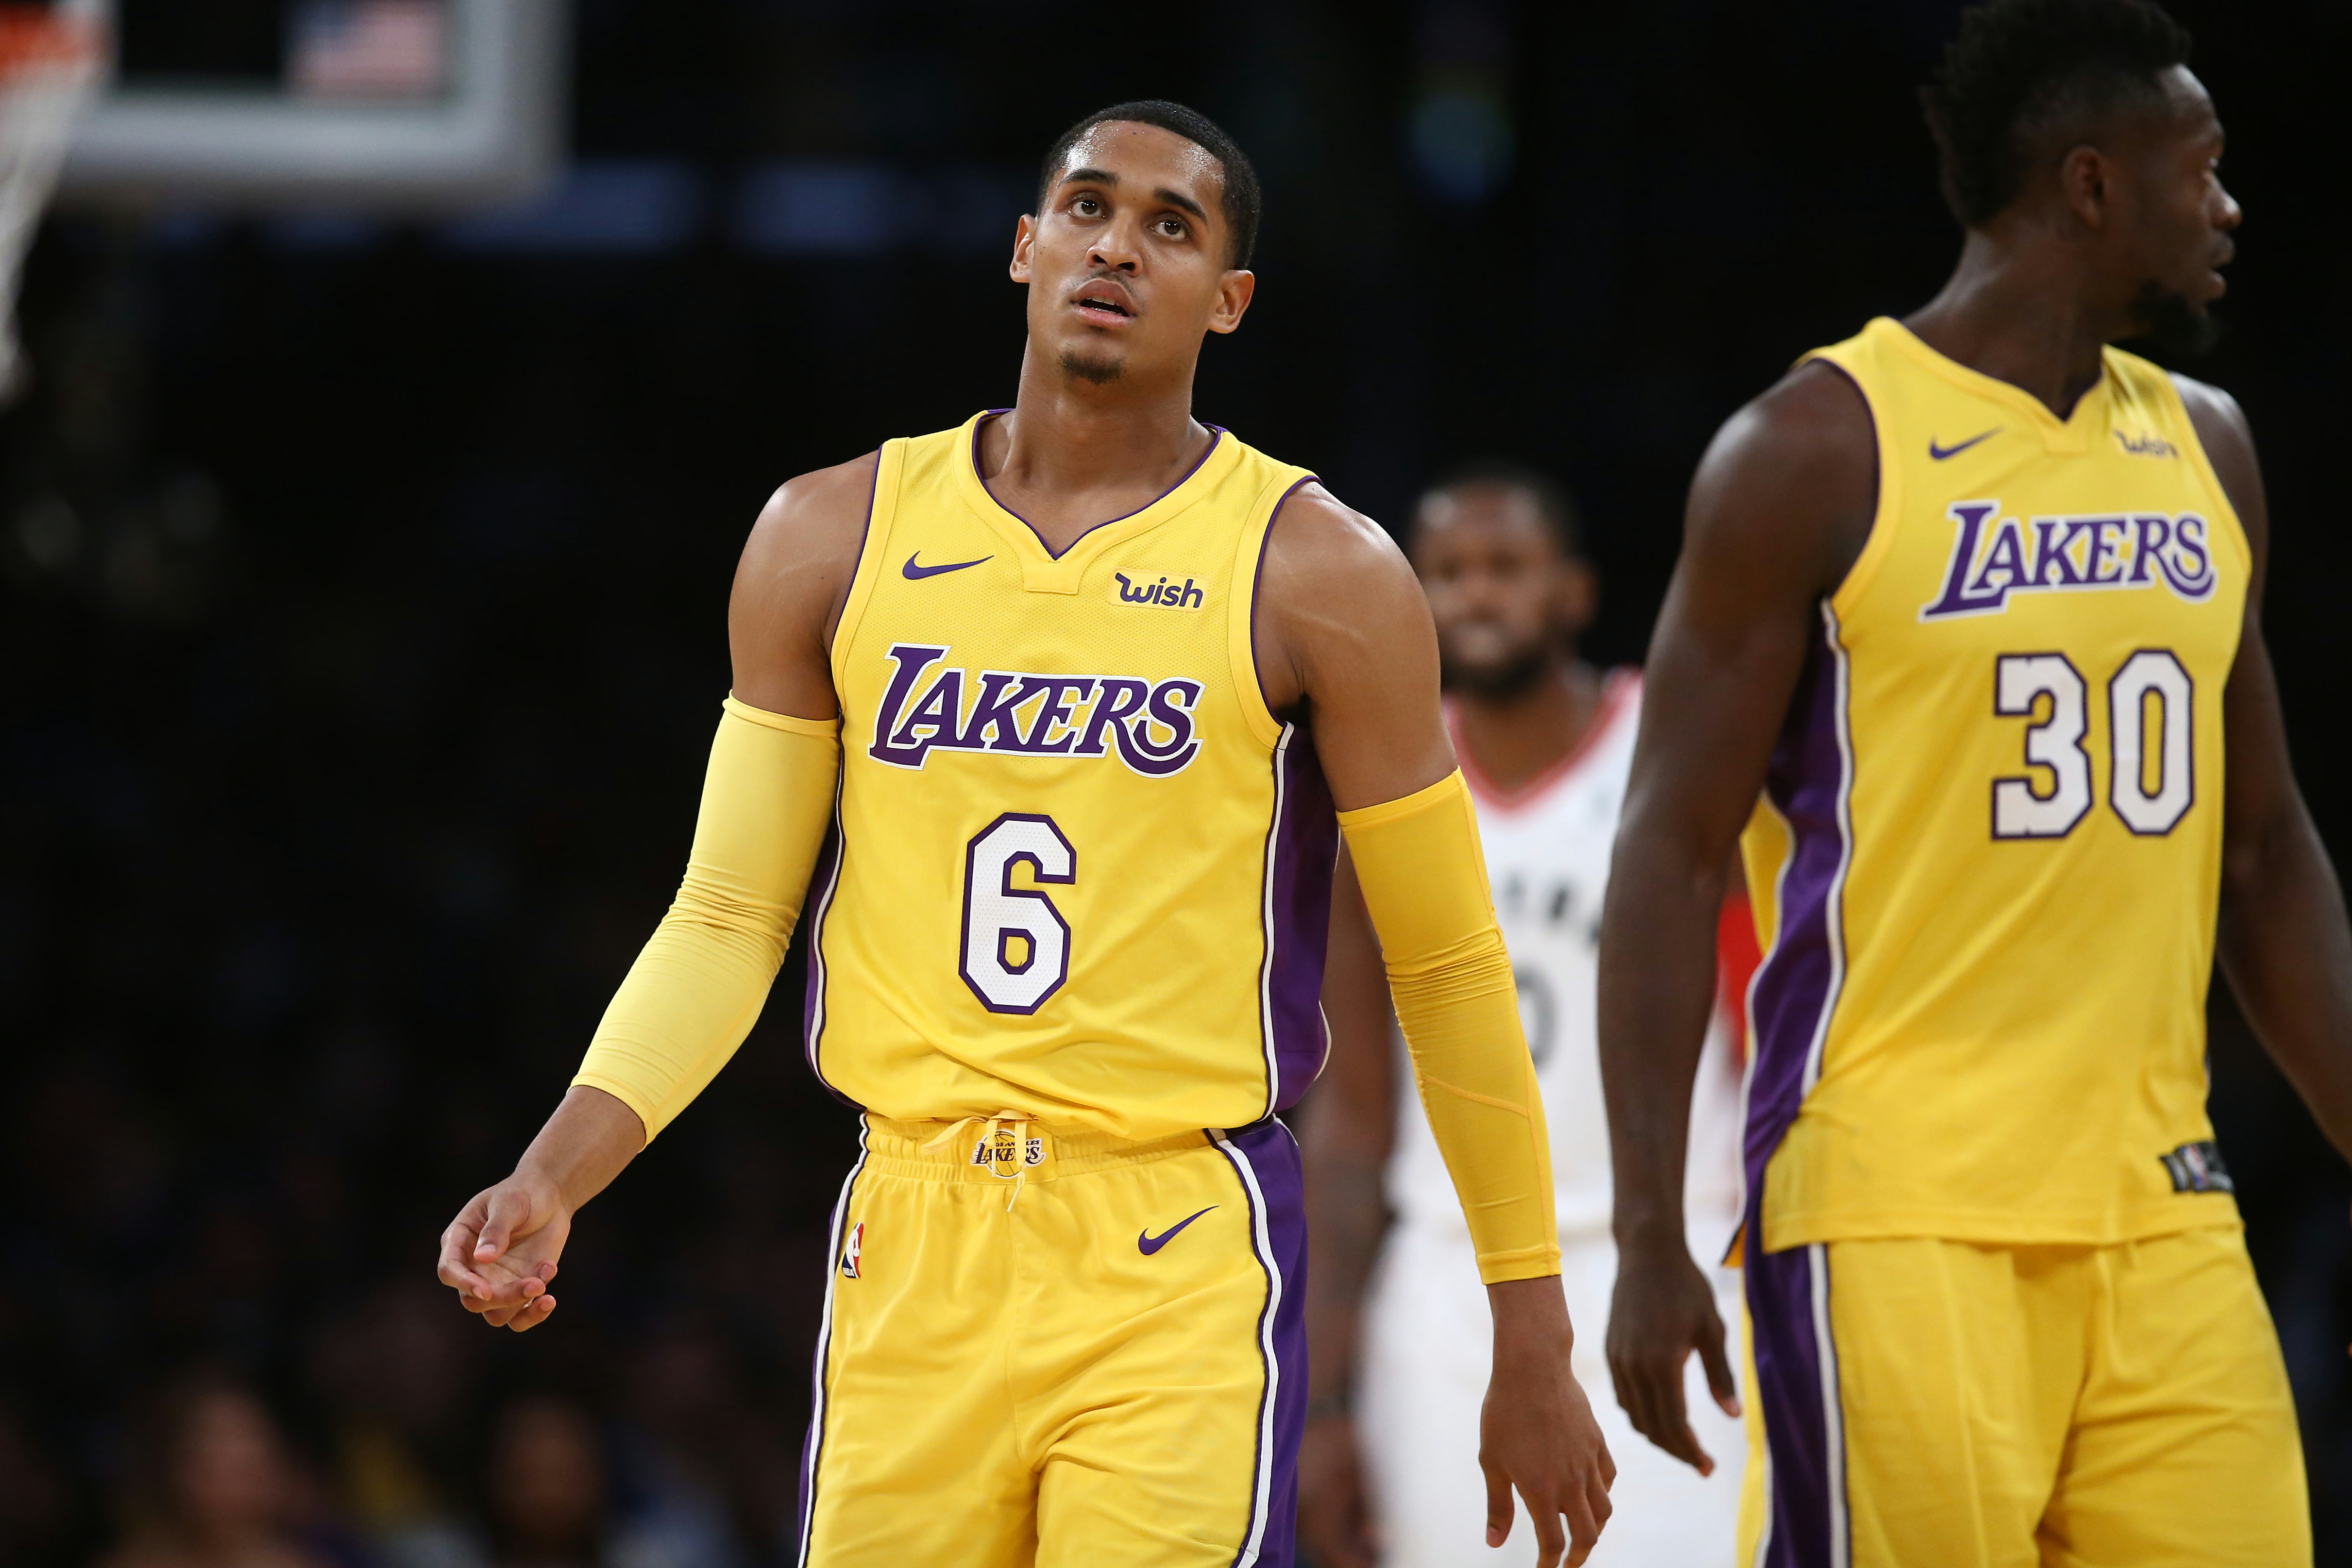 Los Angeles Lakers 50 Greatest Players in Lakers History (Updated 2023